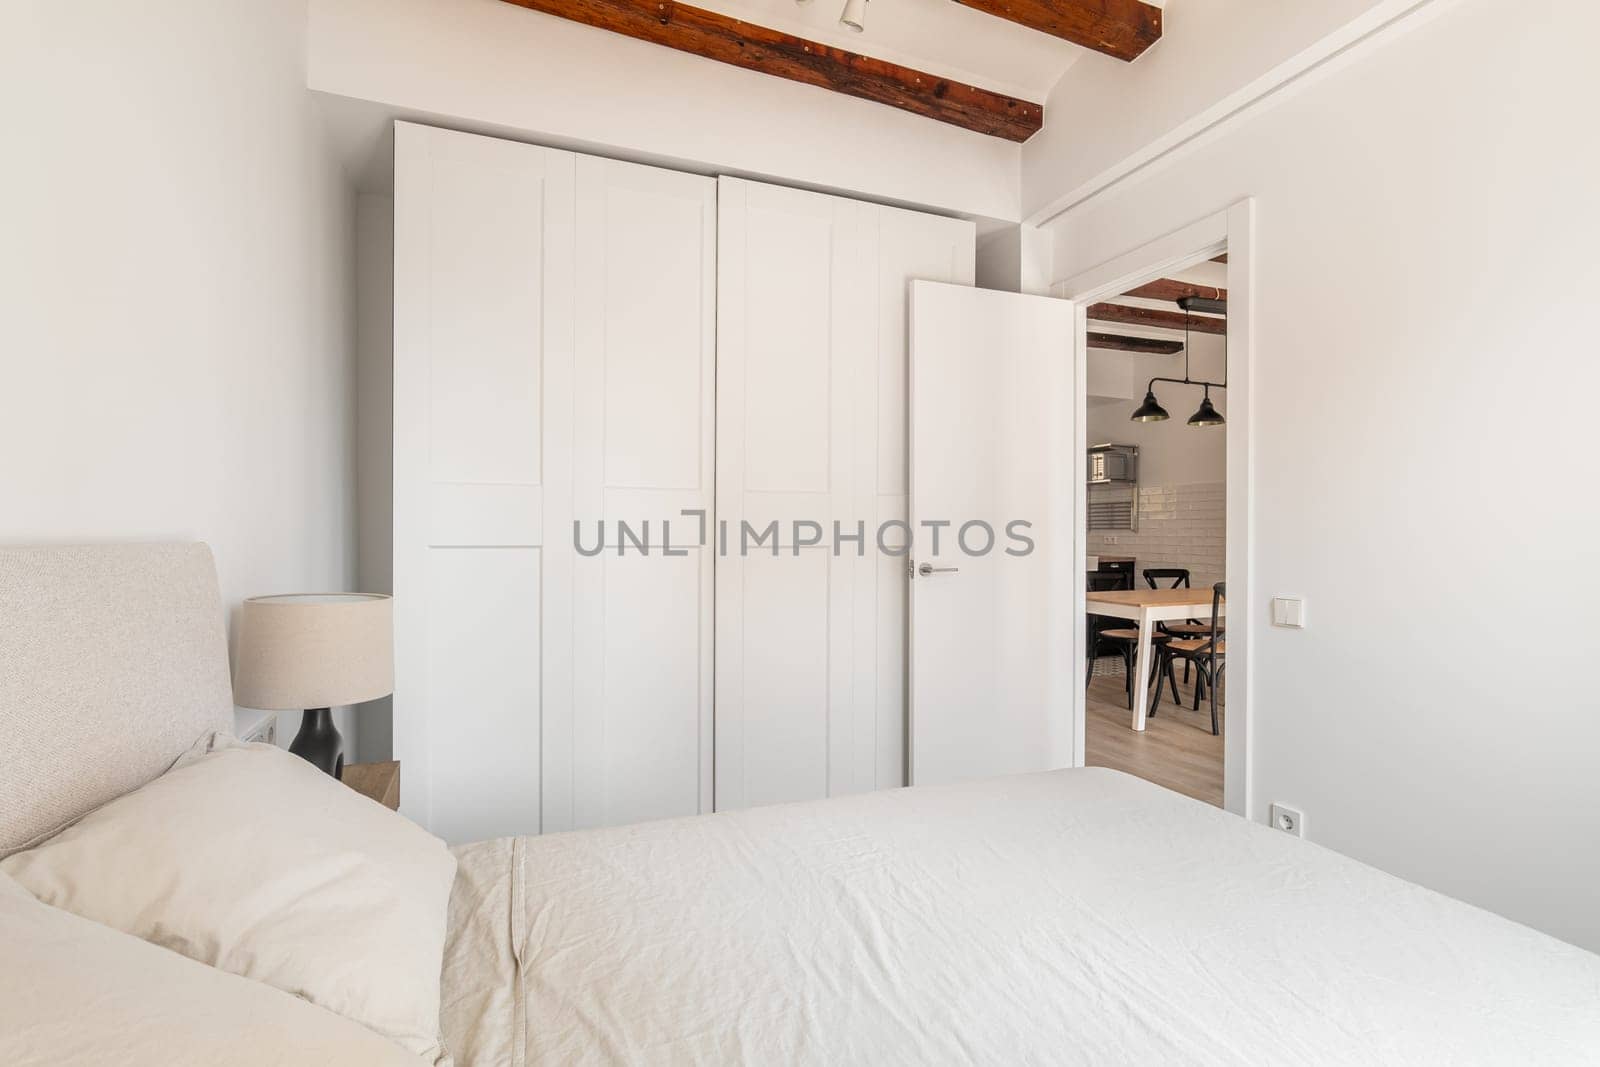 Large wardrobe and soft bed in white minimalist bedroom by apavlin